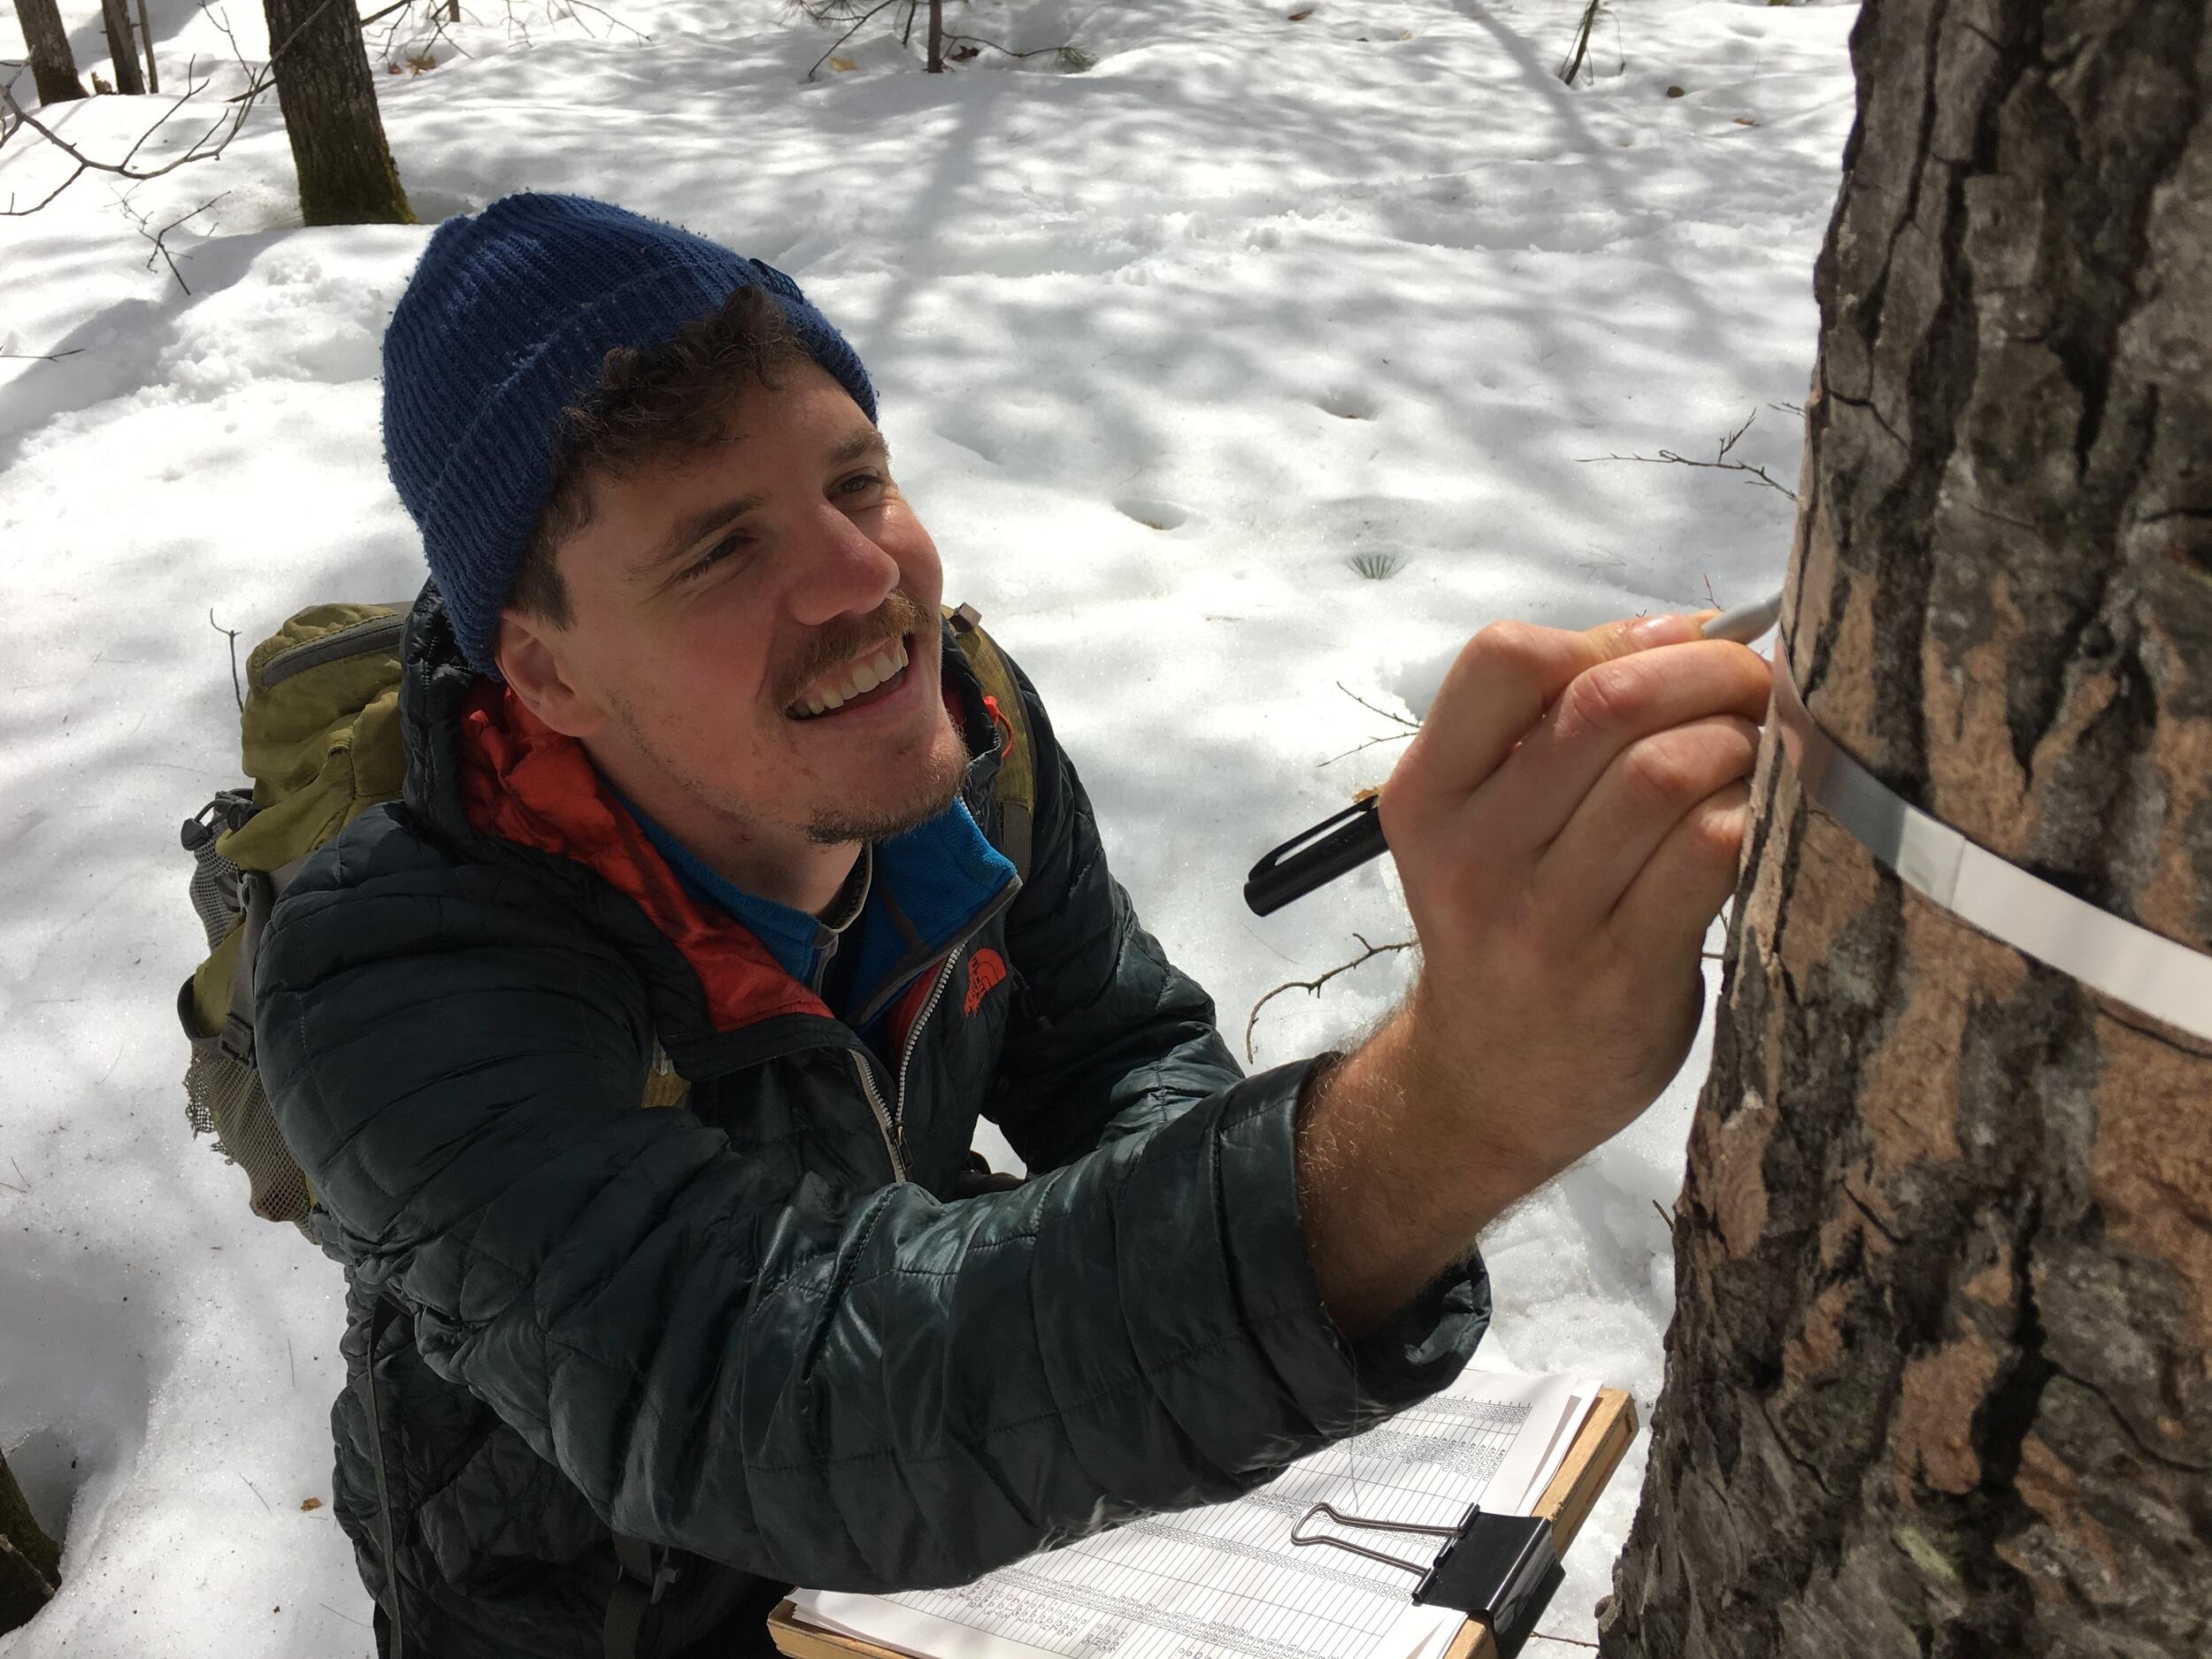 Maxim Grigri, who received his master’s degree from VCU this year, measures a tree's diameter from a permanently affixed metal ruler. This allows the researchers to gauge how fast trees are growing and how much carbon they are investing in wood. (Courtesy photo)
